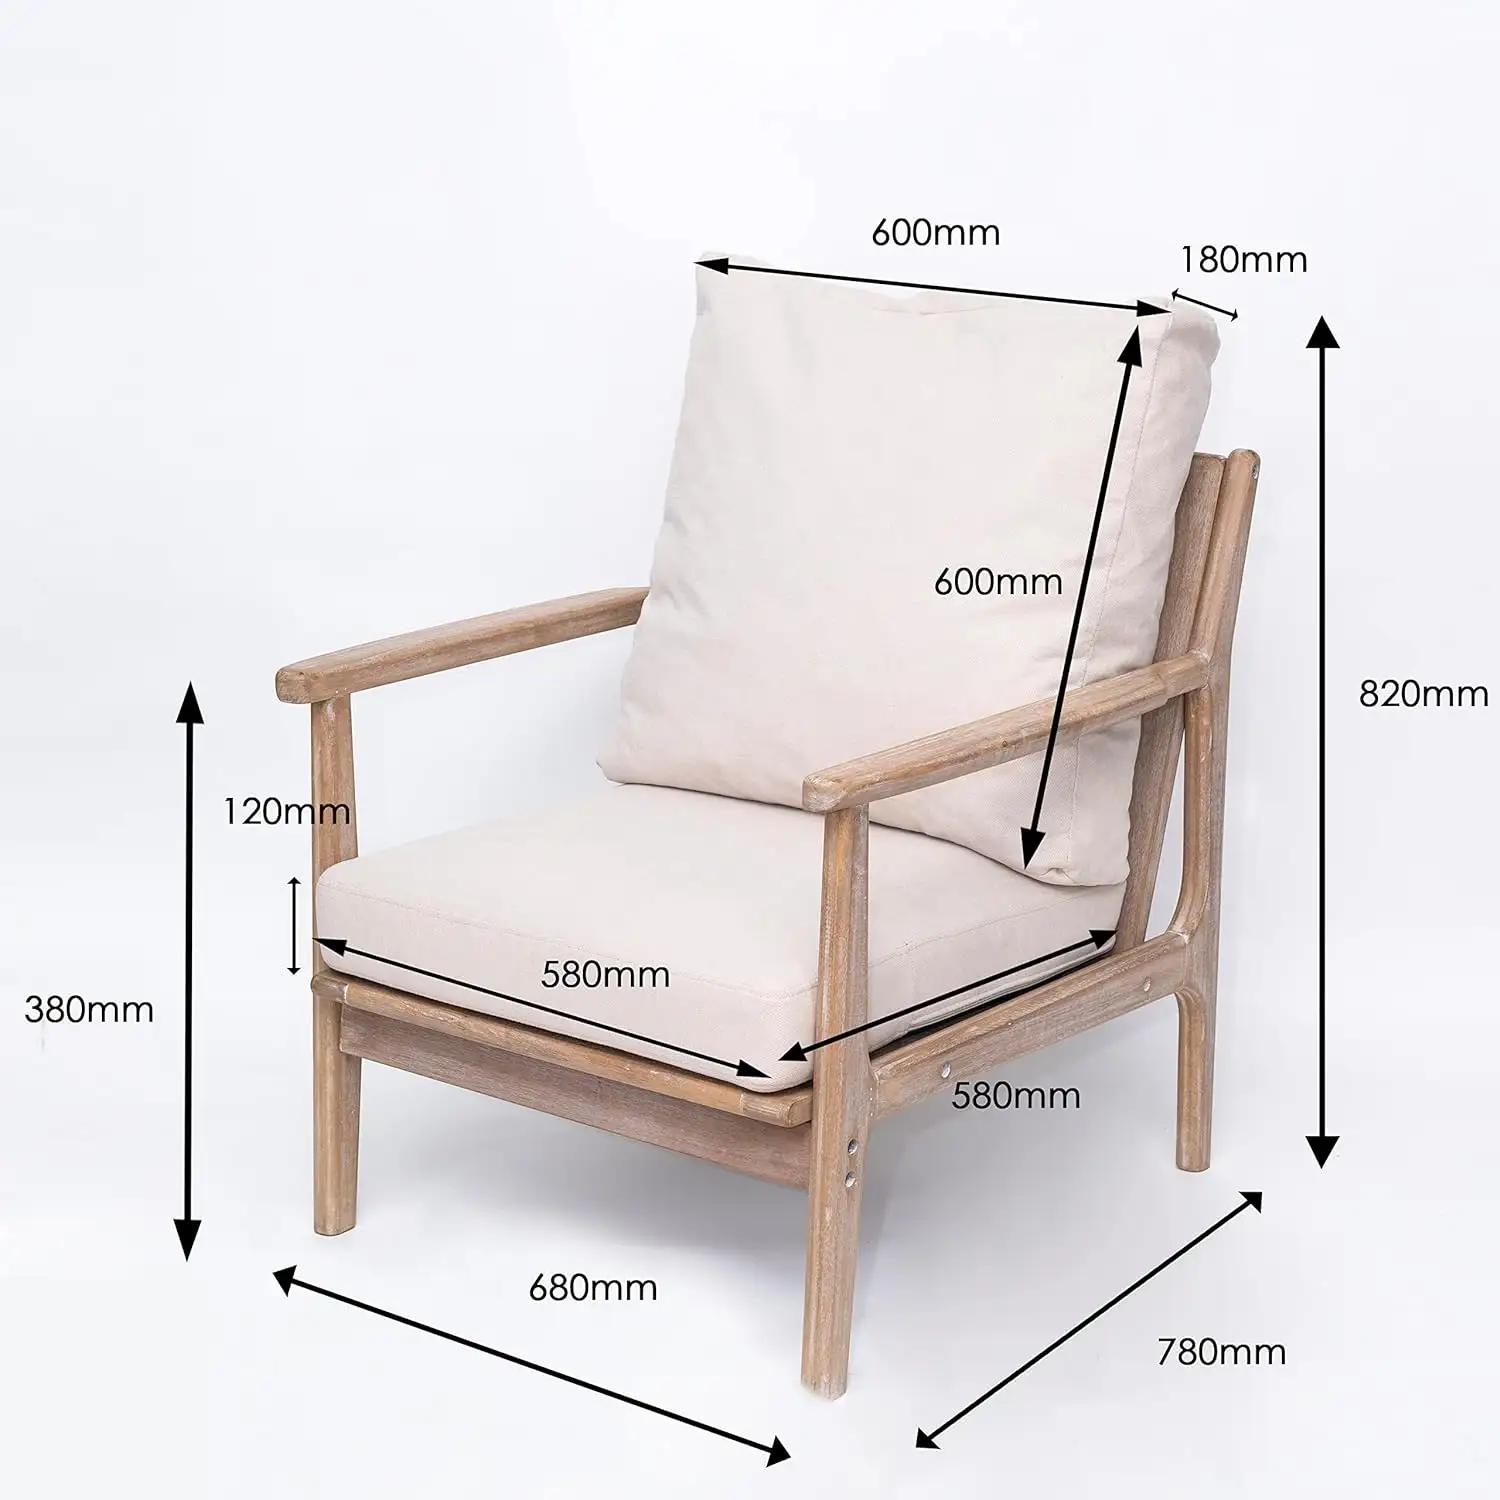 Medieval retro decorative chair Wooden frame armchair Modern lounge chair for Living room bedroom balcony (beige)